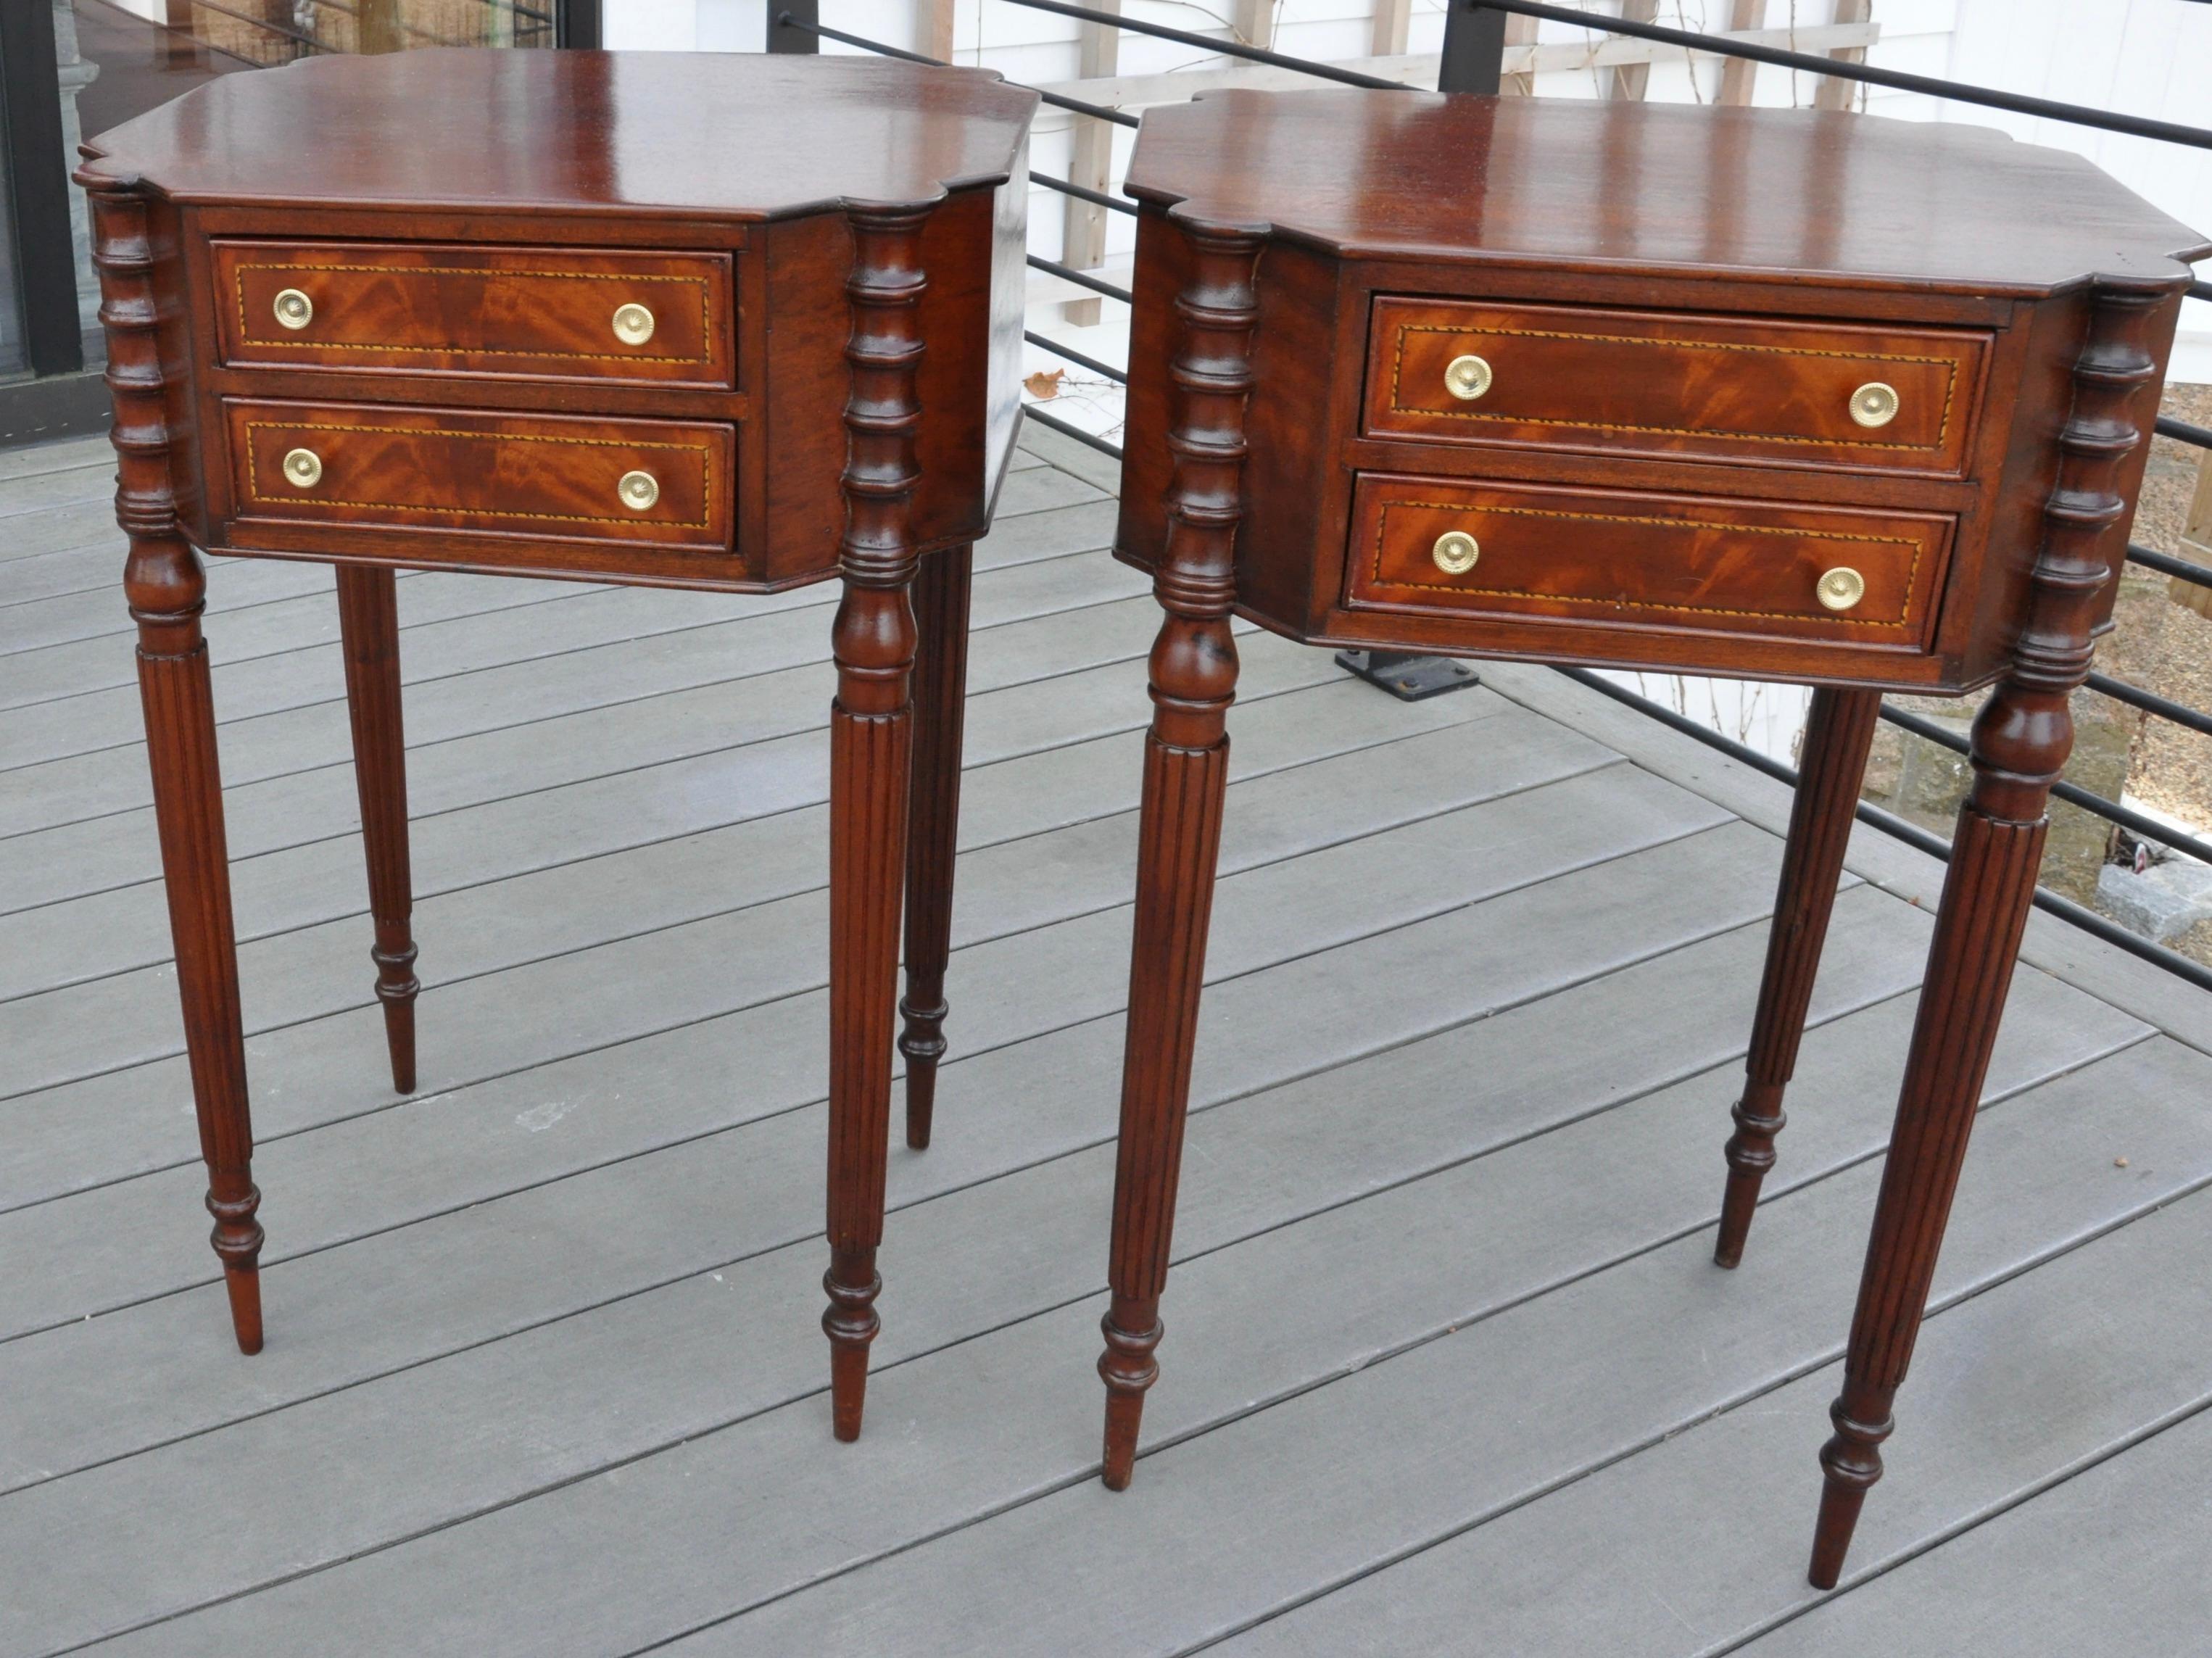 Pair of Federal style work or side tables in the style of McIntire. Two-drawer with reeded legs, string inlay and turned stiles. Mahogany. A beautiful and rare pair.